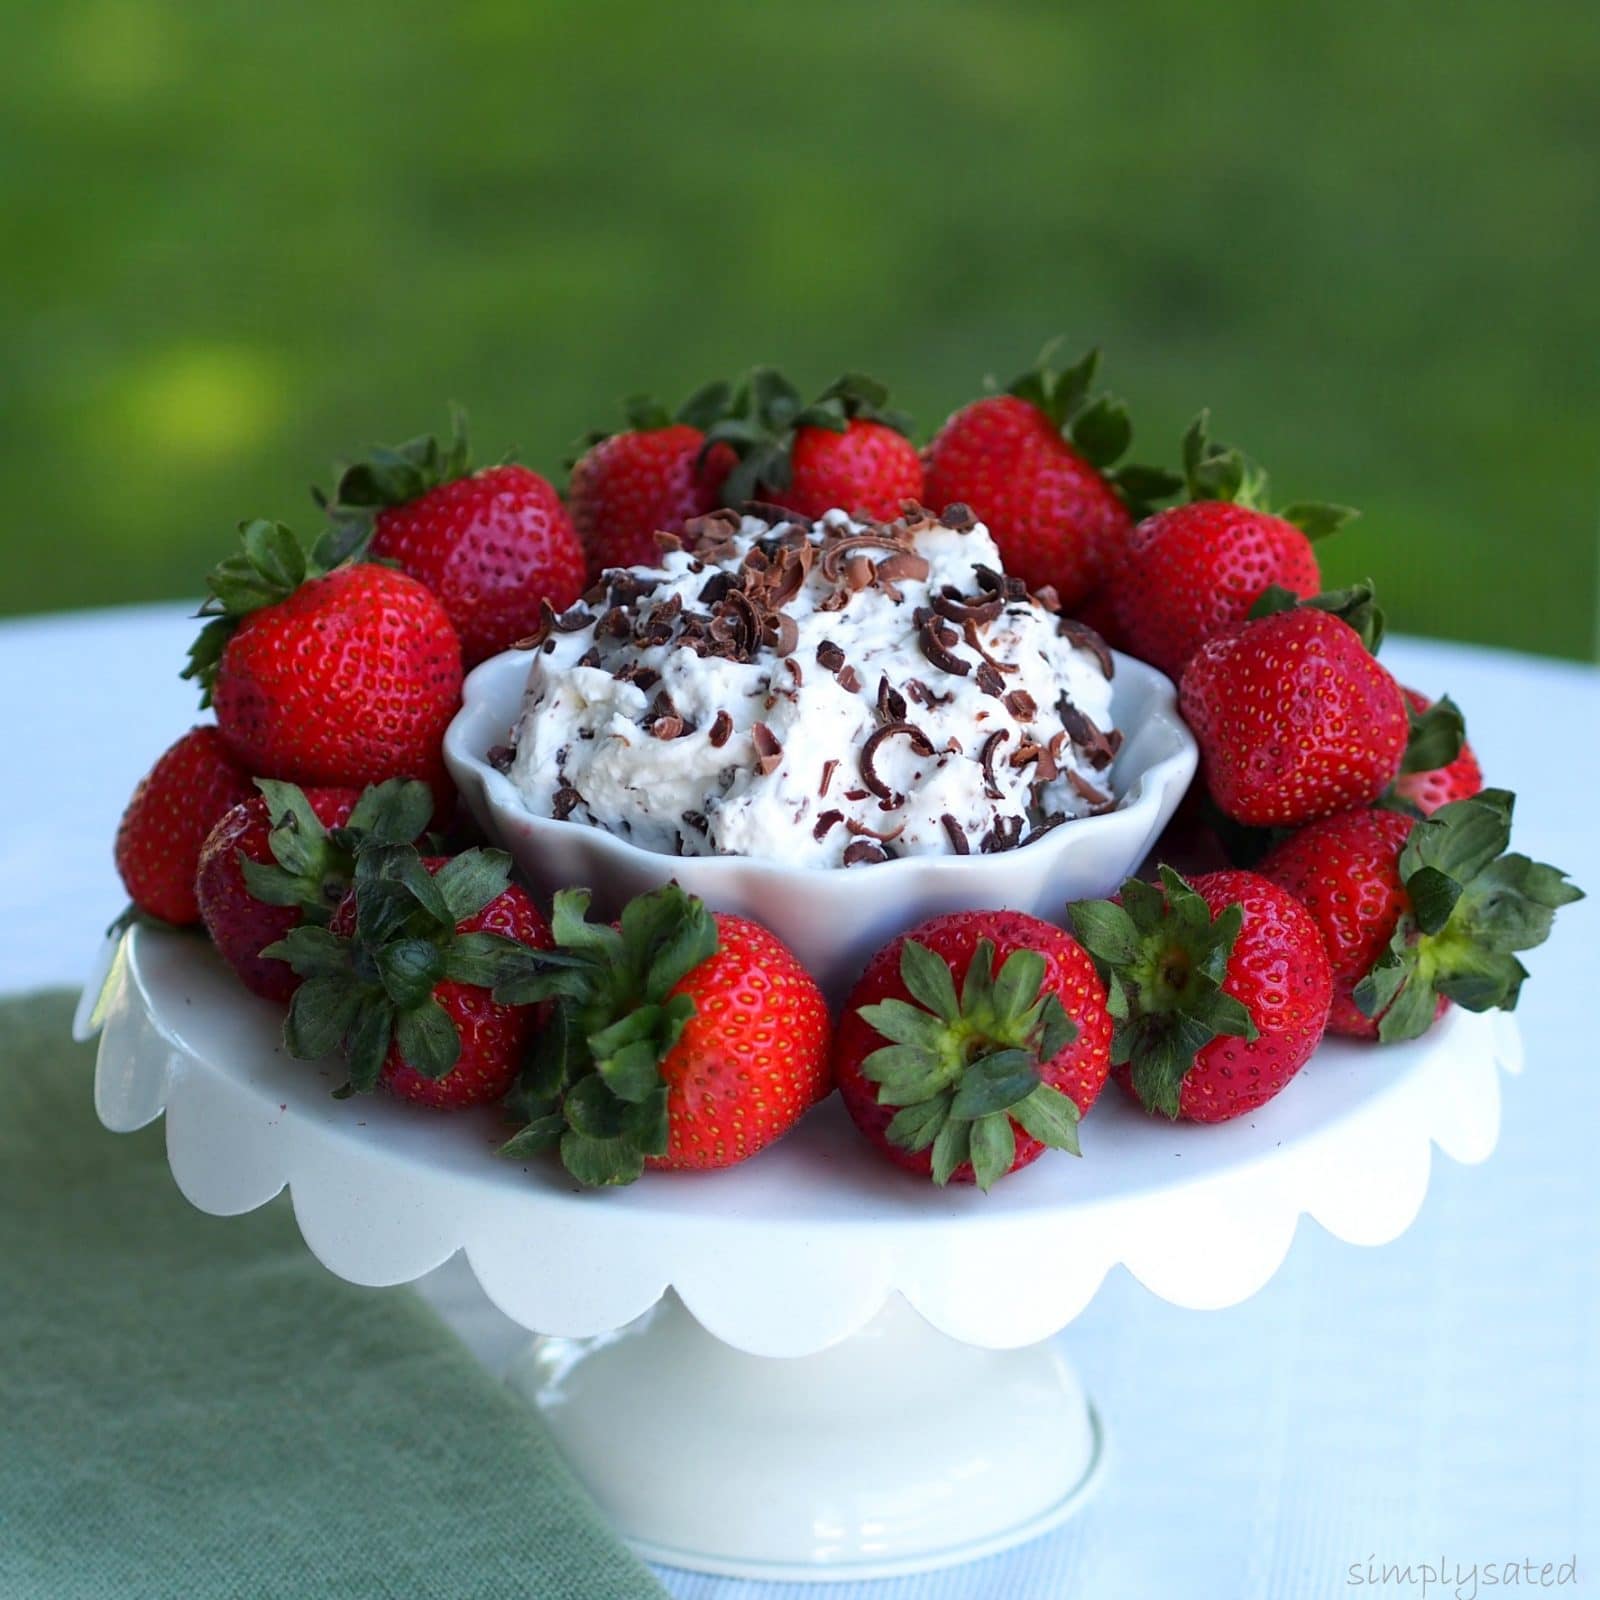 Strawberries & Cream with Chocolate is a beautiful and easy dessert or appetizer. www.simplysated.com